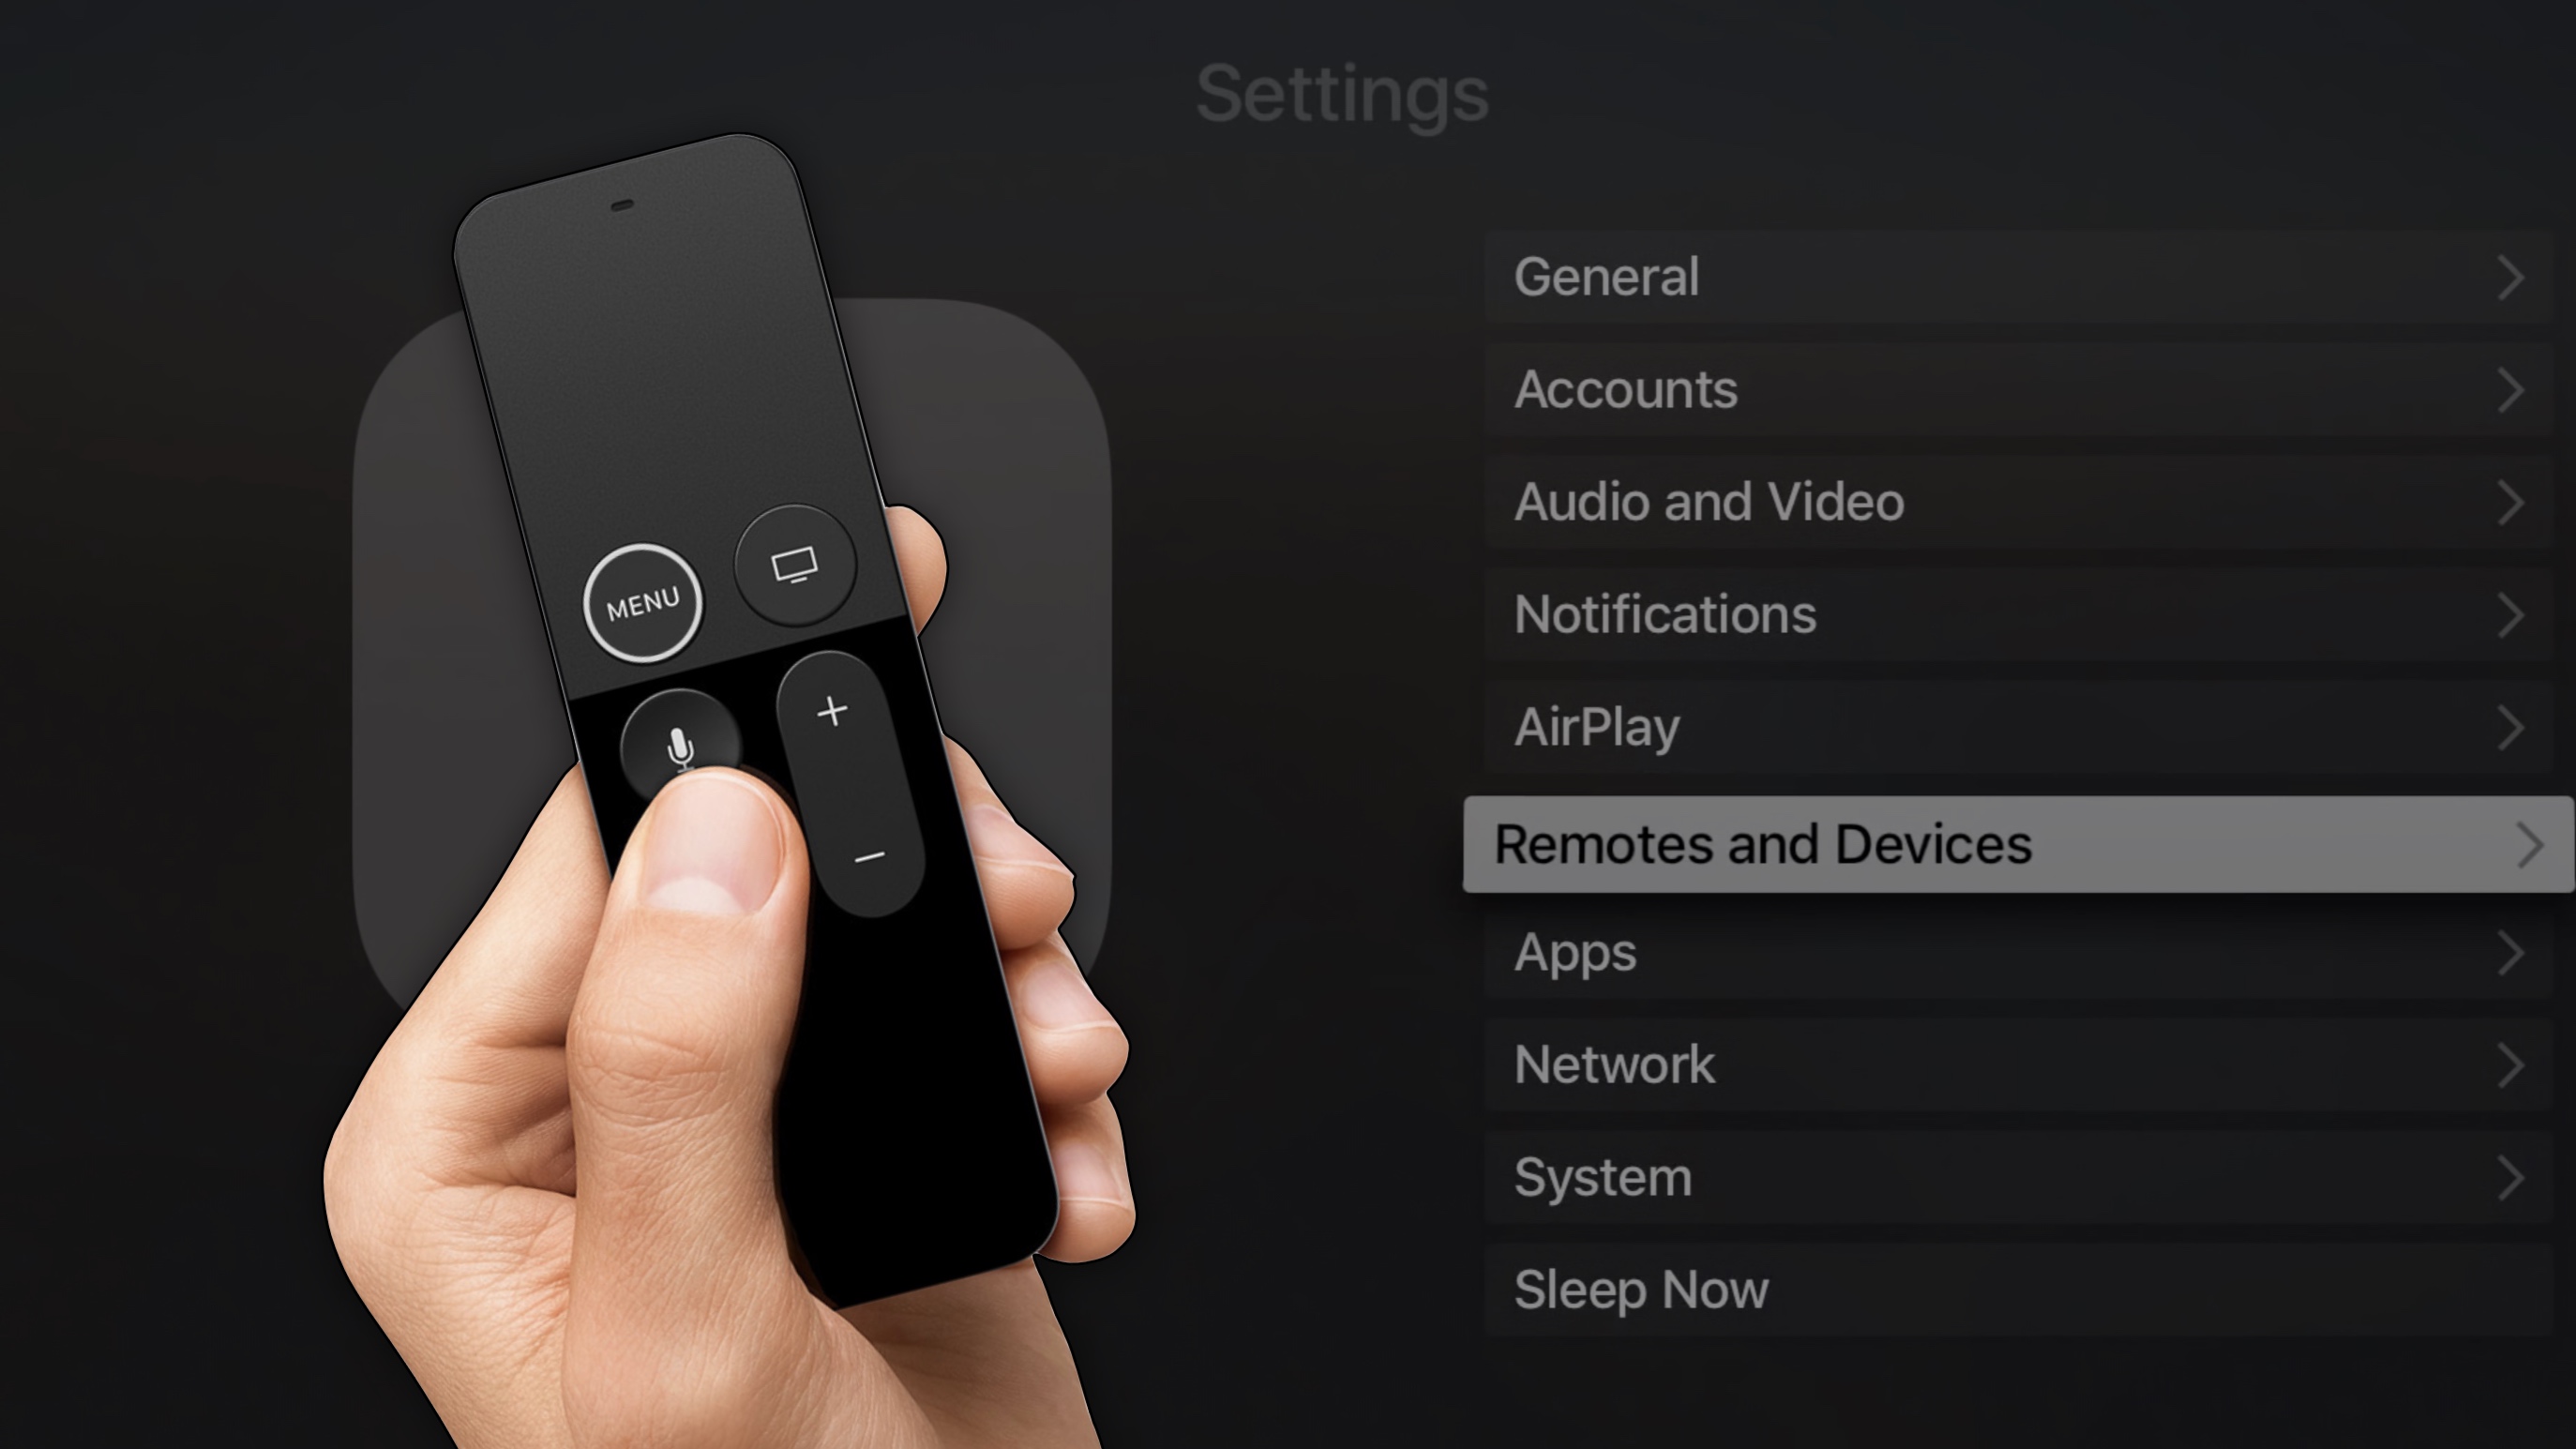 https://9to5mac.com/wp-content/uploads/sites/6/2019/12/apple-tv-remote.jpg?quality=82&strip=all